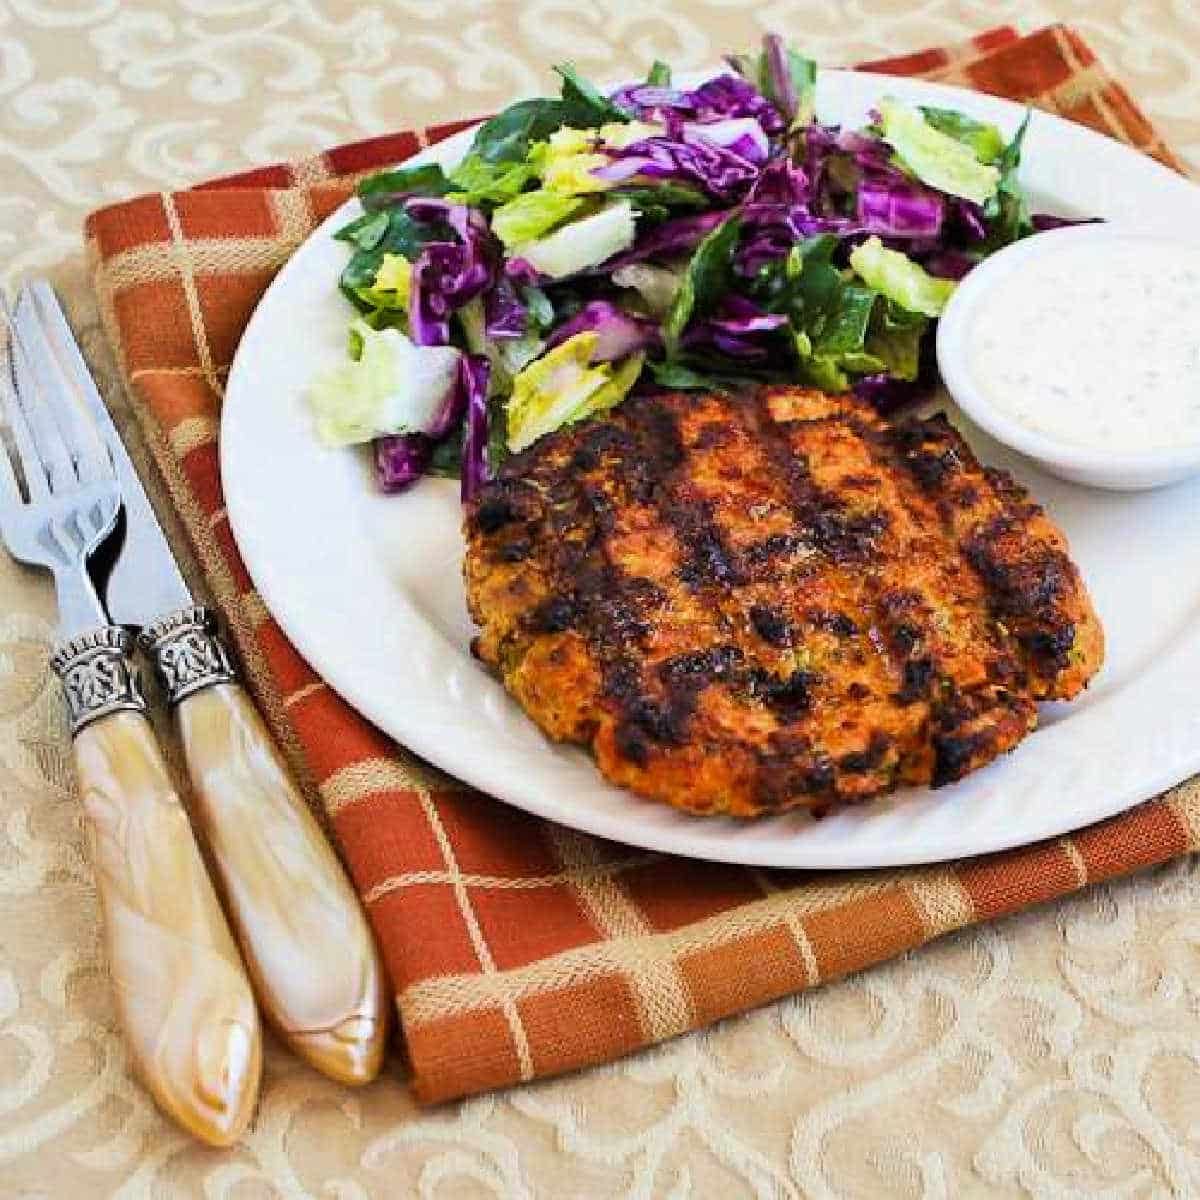 Square image of Grilled Salmon Burgers with Caper Mayo shown on serving plate with salad, on napkin.